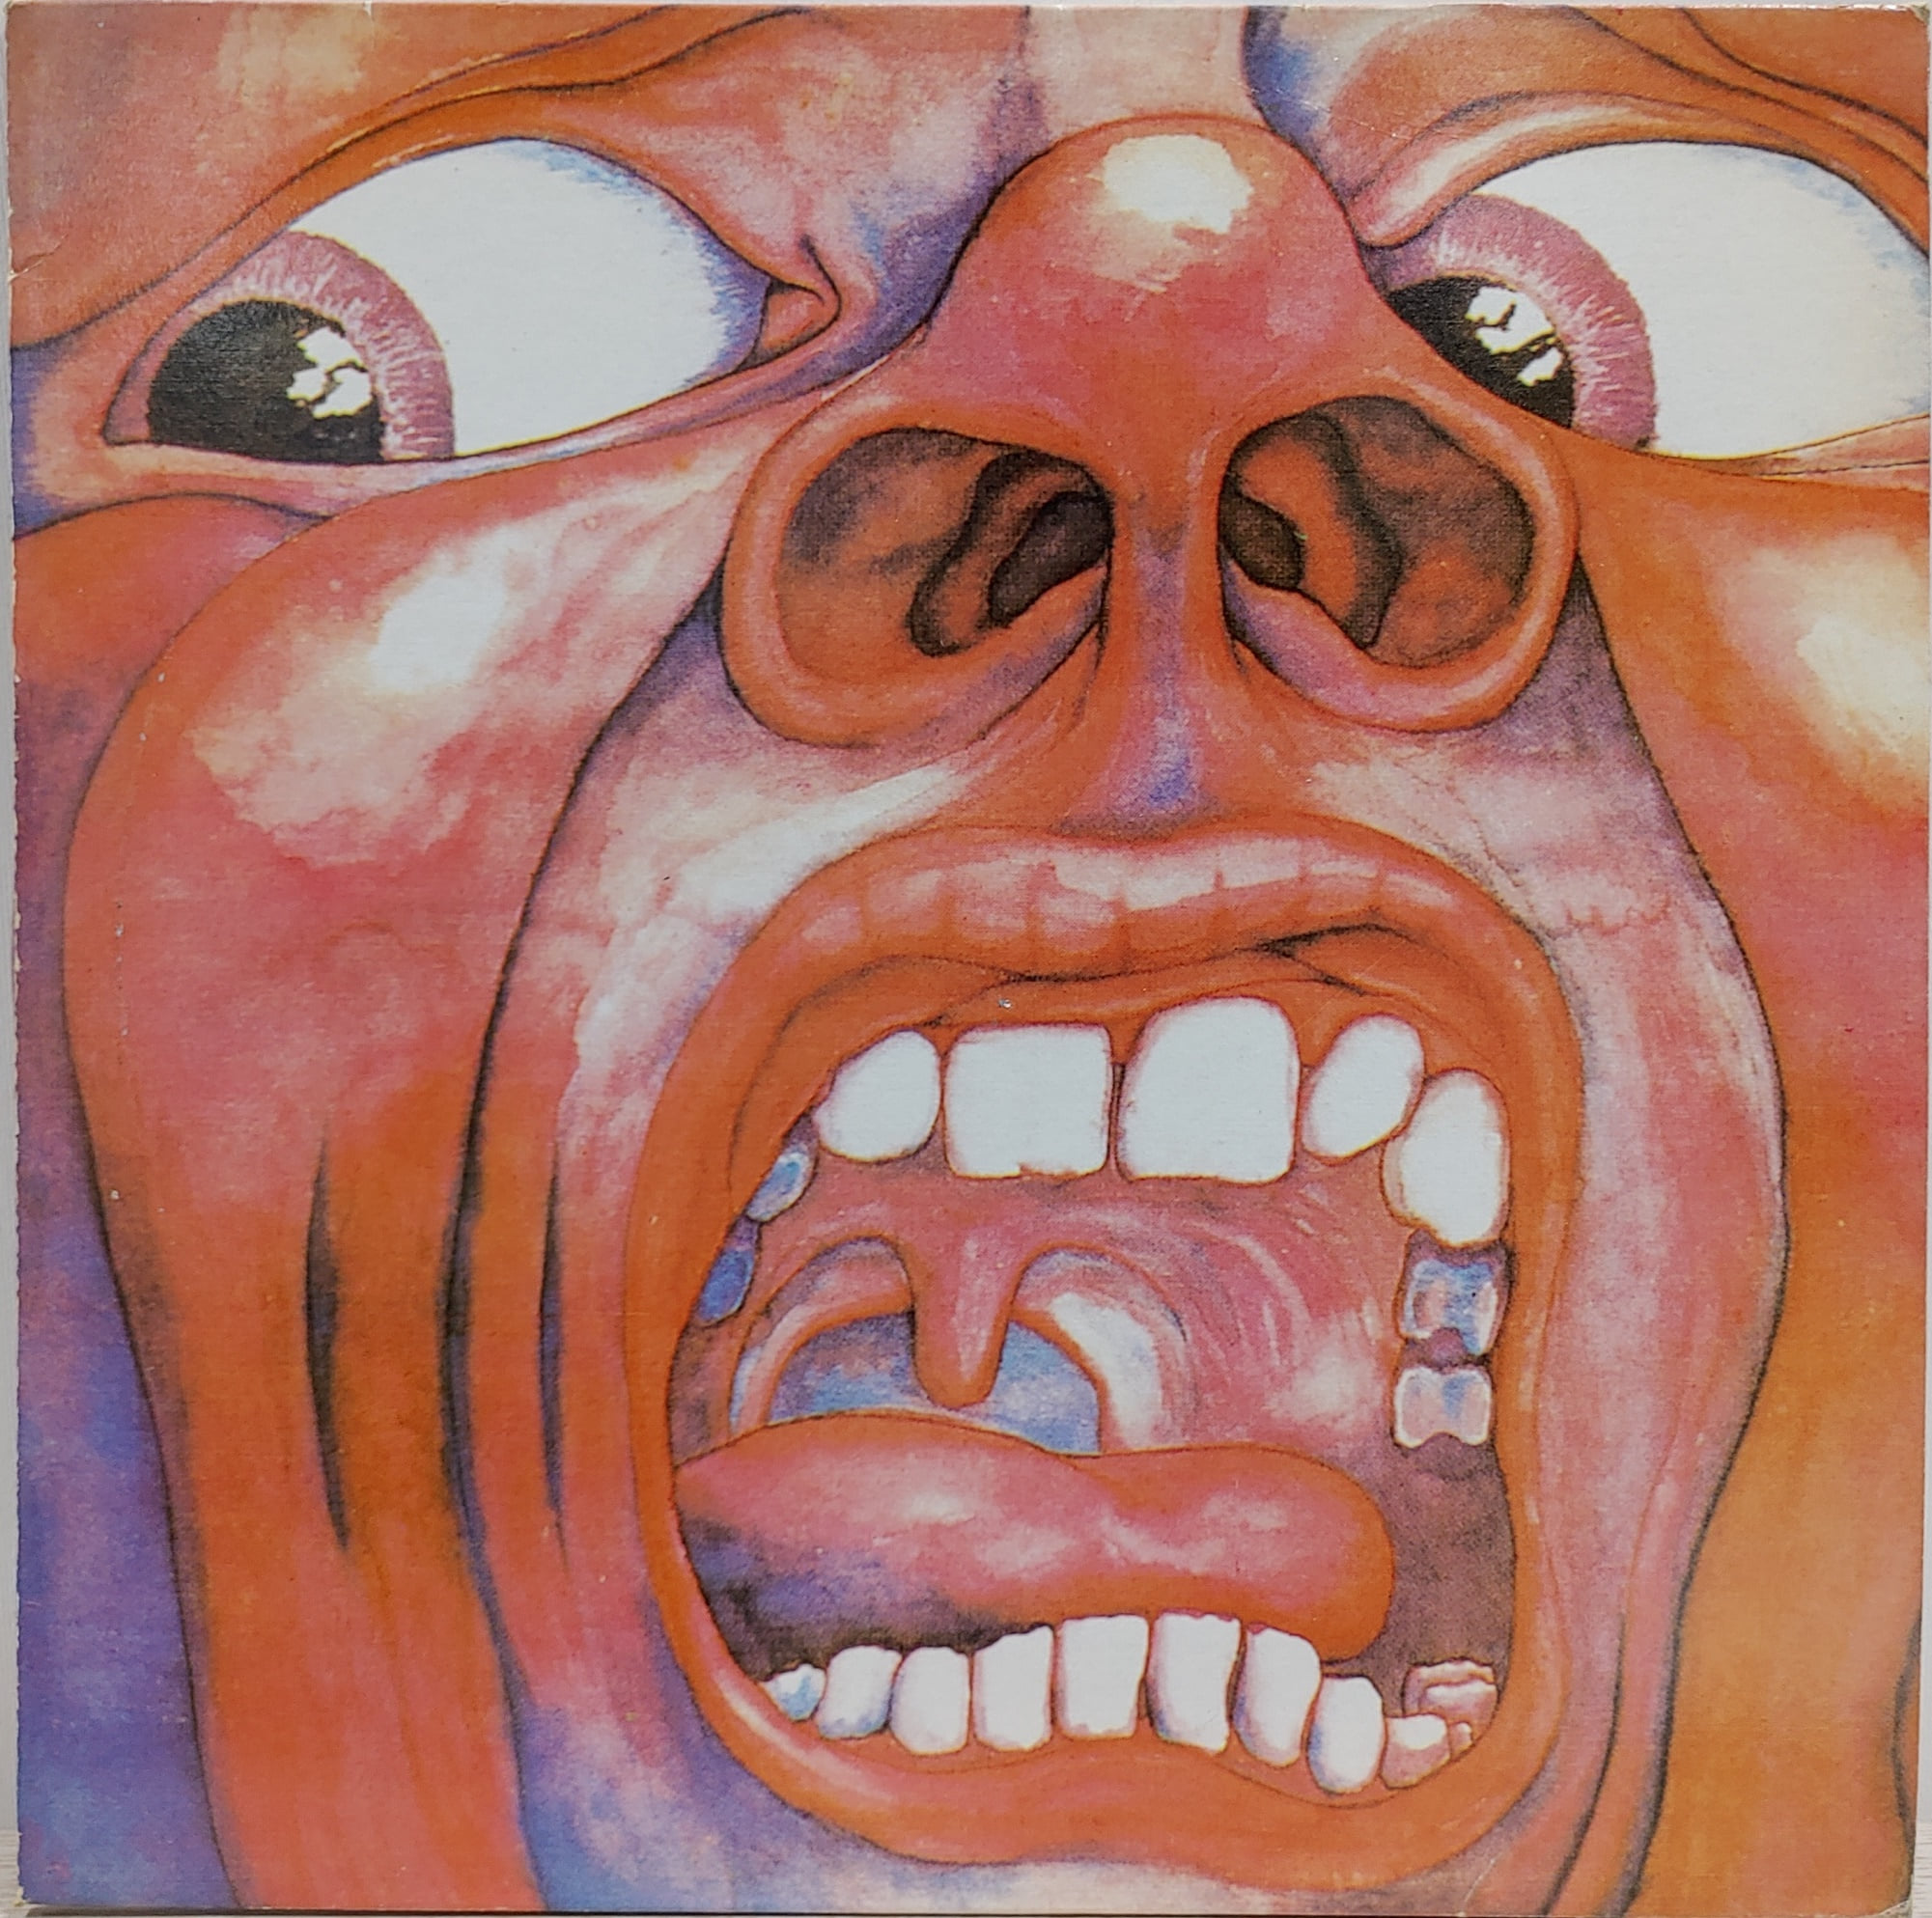 KING CRIMSON / IN THE COURT OF THE CRIMSON KING